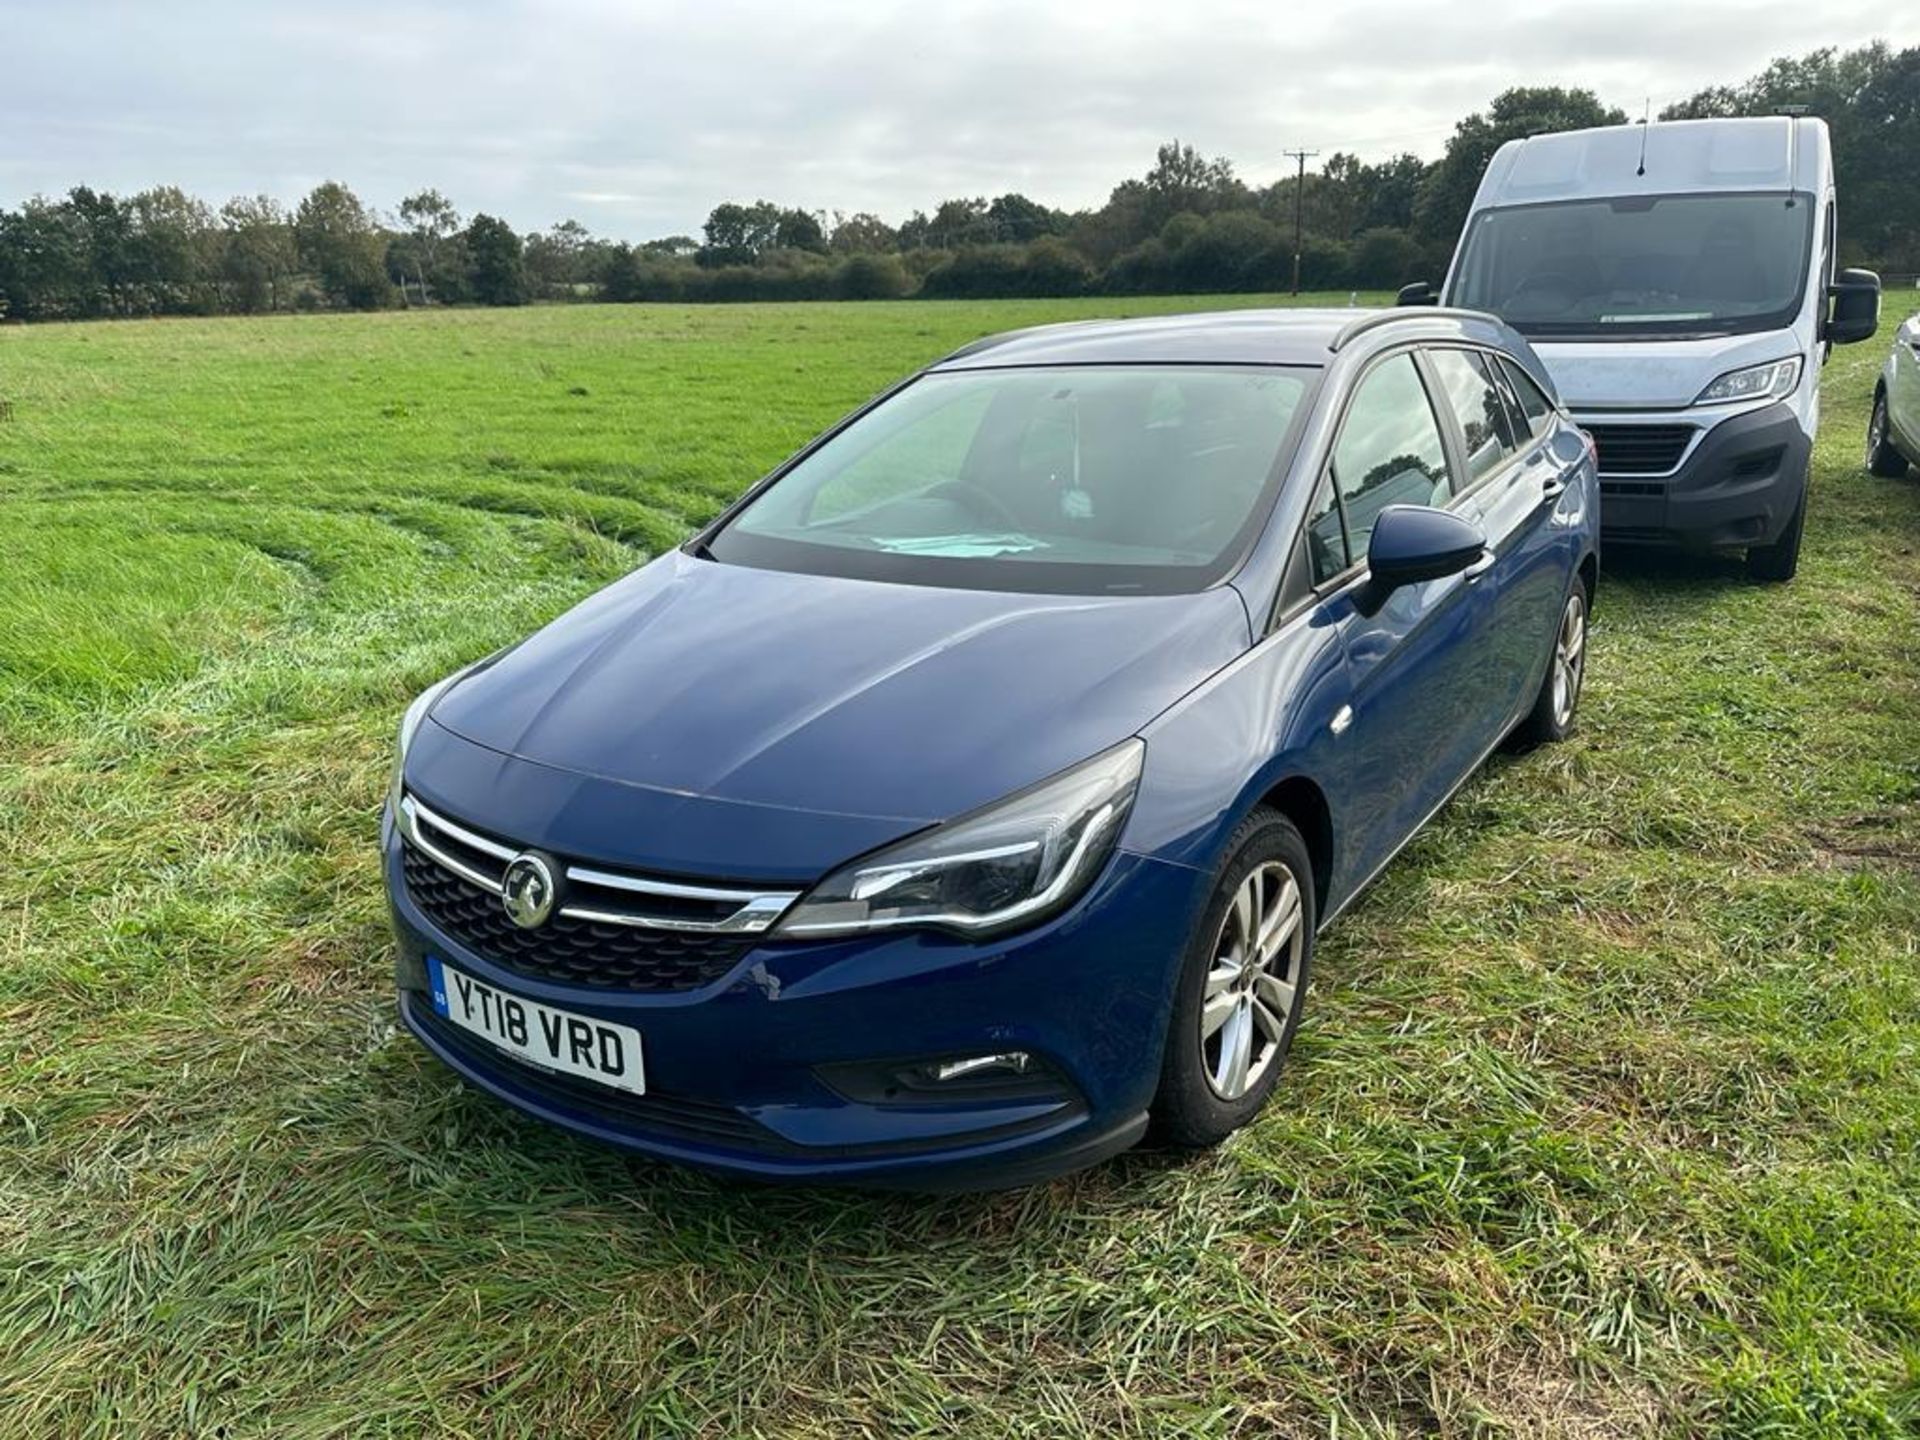 2018 18 VAUXHALL ASTRA ESTATE 1.6 CDTI ESTATE - 86K MILES WITH HISTORY - NON RUNNER  - Image 5 of 10